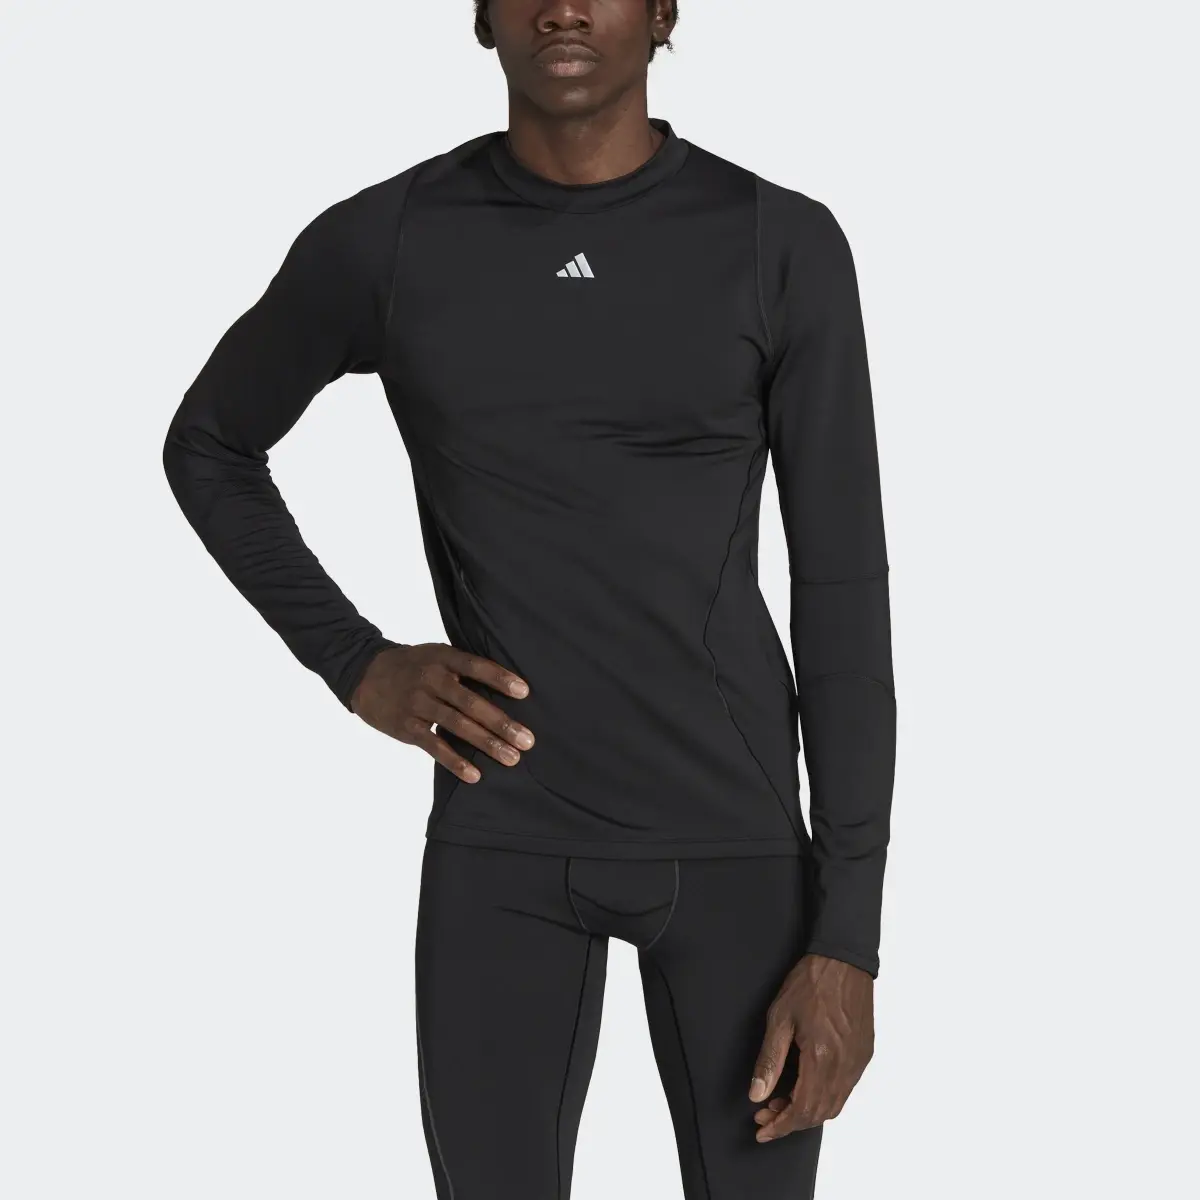 Adidas Techfit COLD.RDY Training Long-Sleeve Top. 1